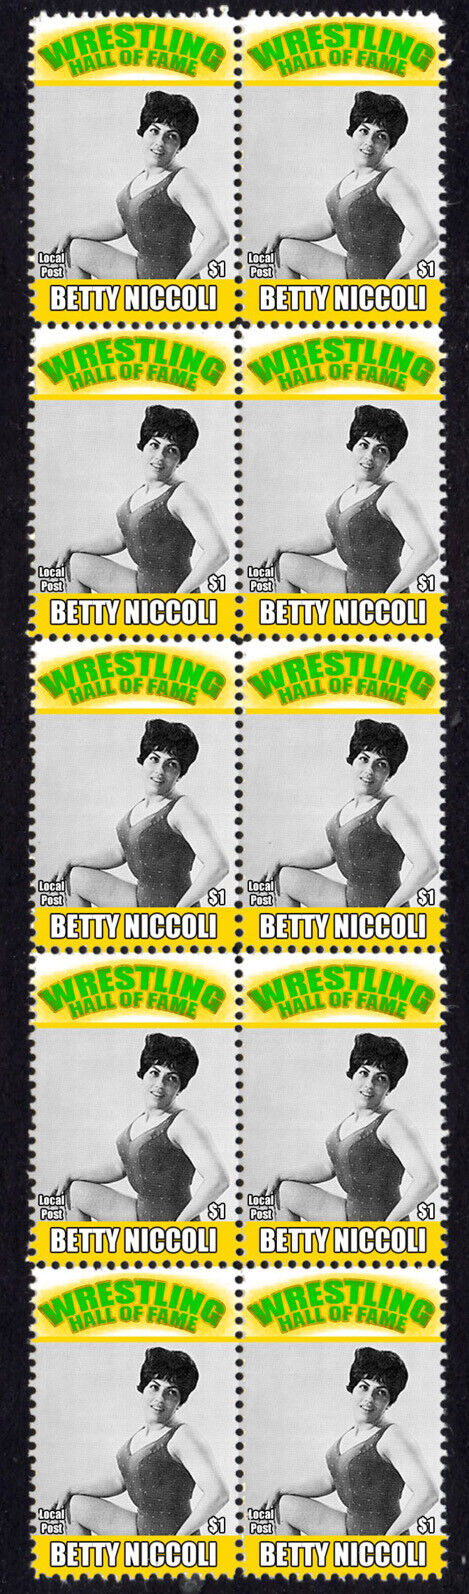 BETTY NICCOLI WRESTLING HALL OF FAME INDUCTEE STRIP OF 10 MINT S